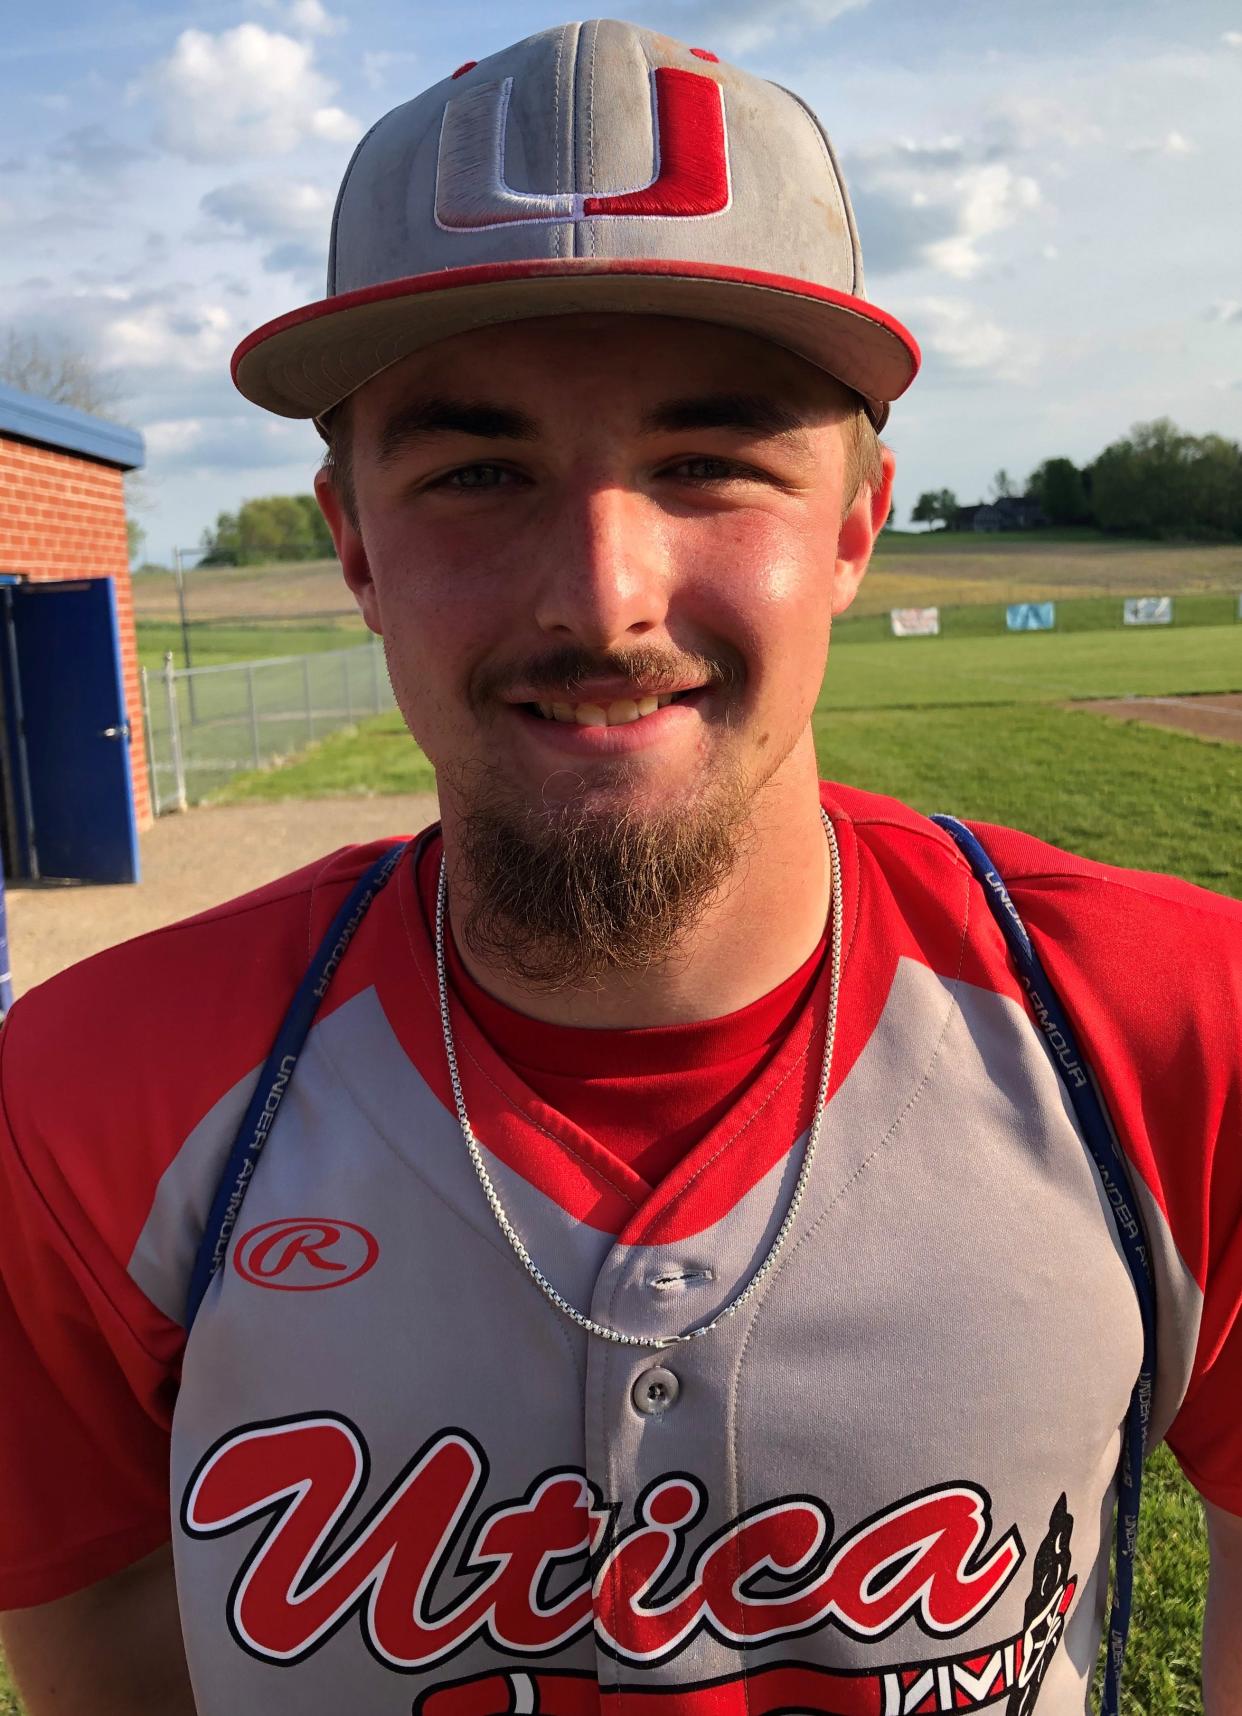 Utica senior Aidyn Burgess delivered RBI singles in his first two at bats as the visiting Redskins beat Licking Valley 5-3 in an LCL crossover game Wednesday.